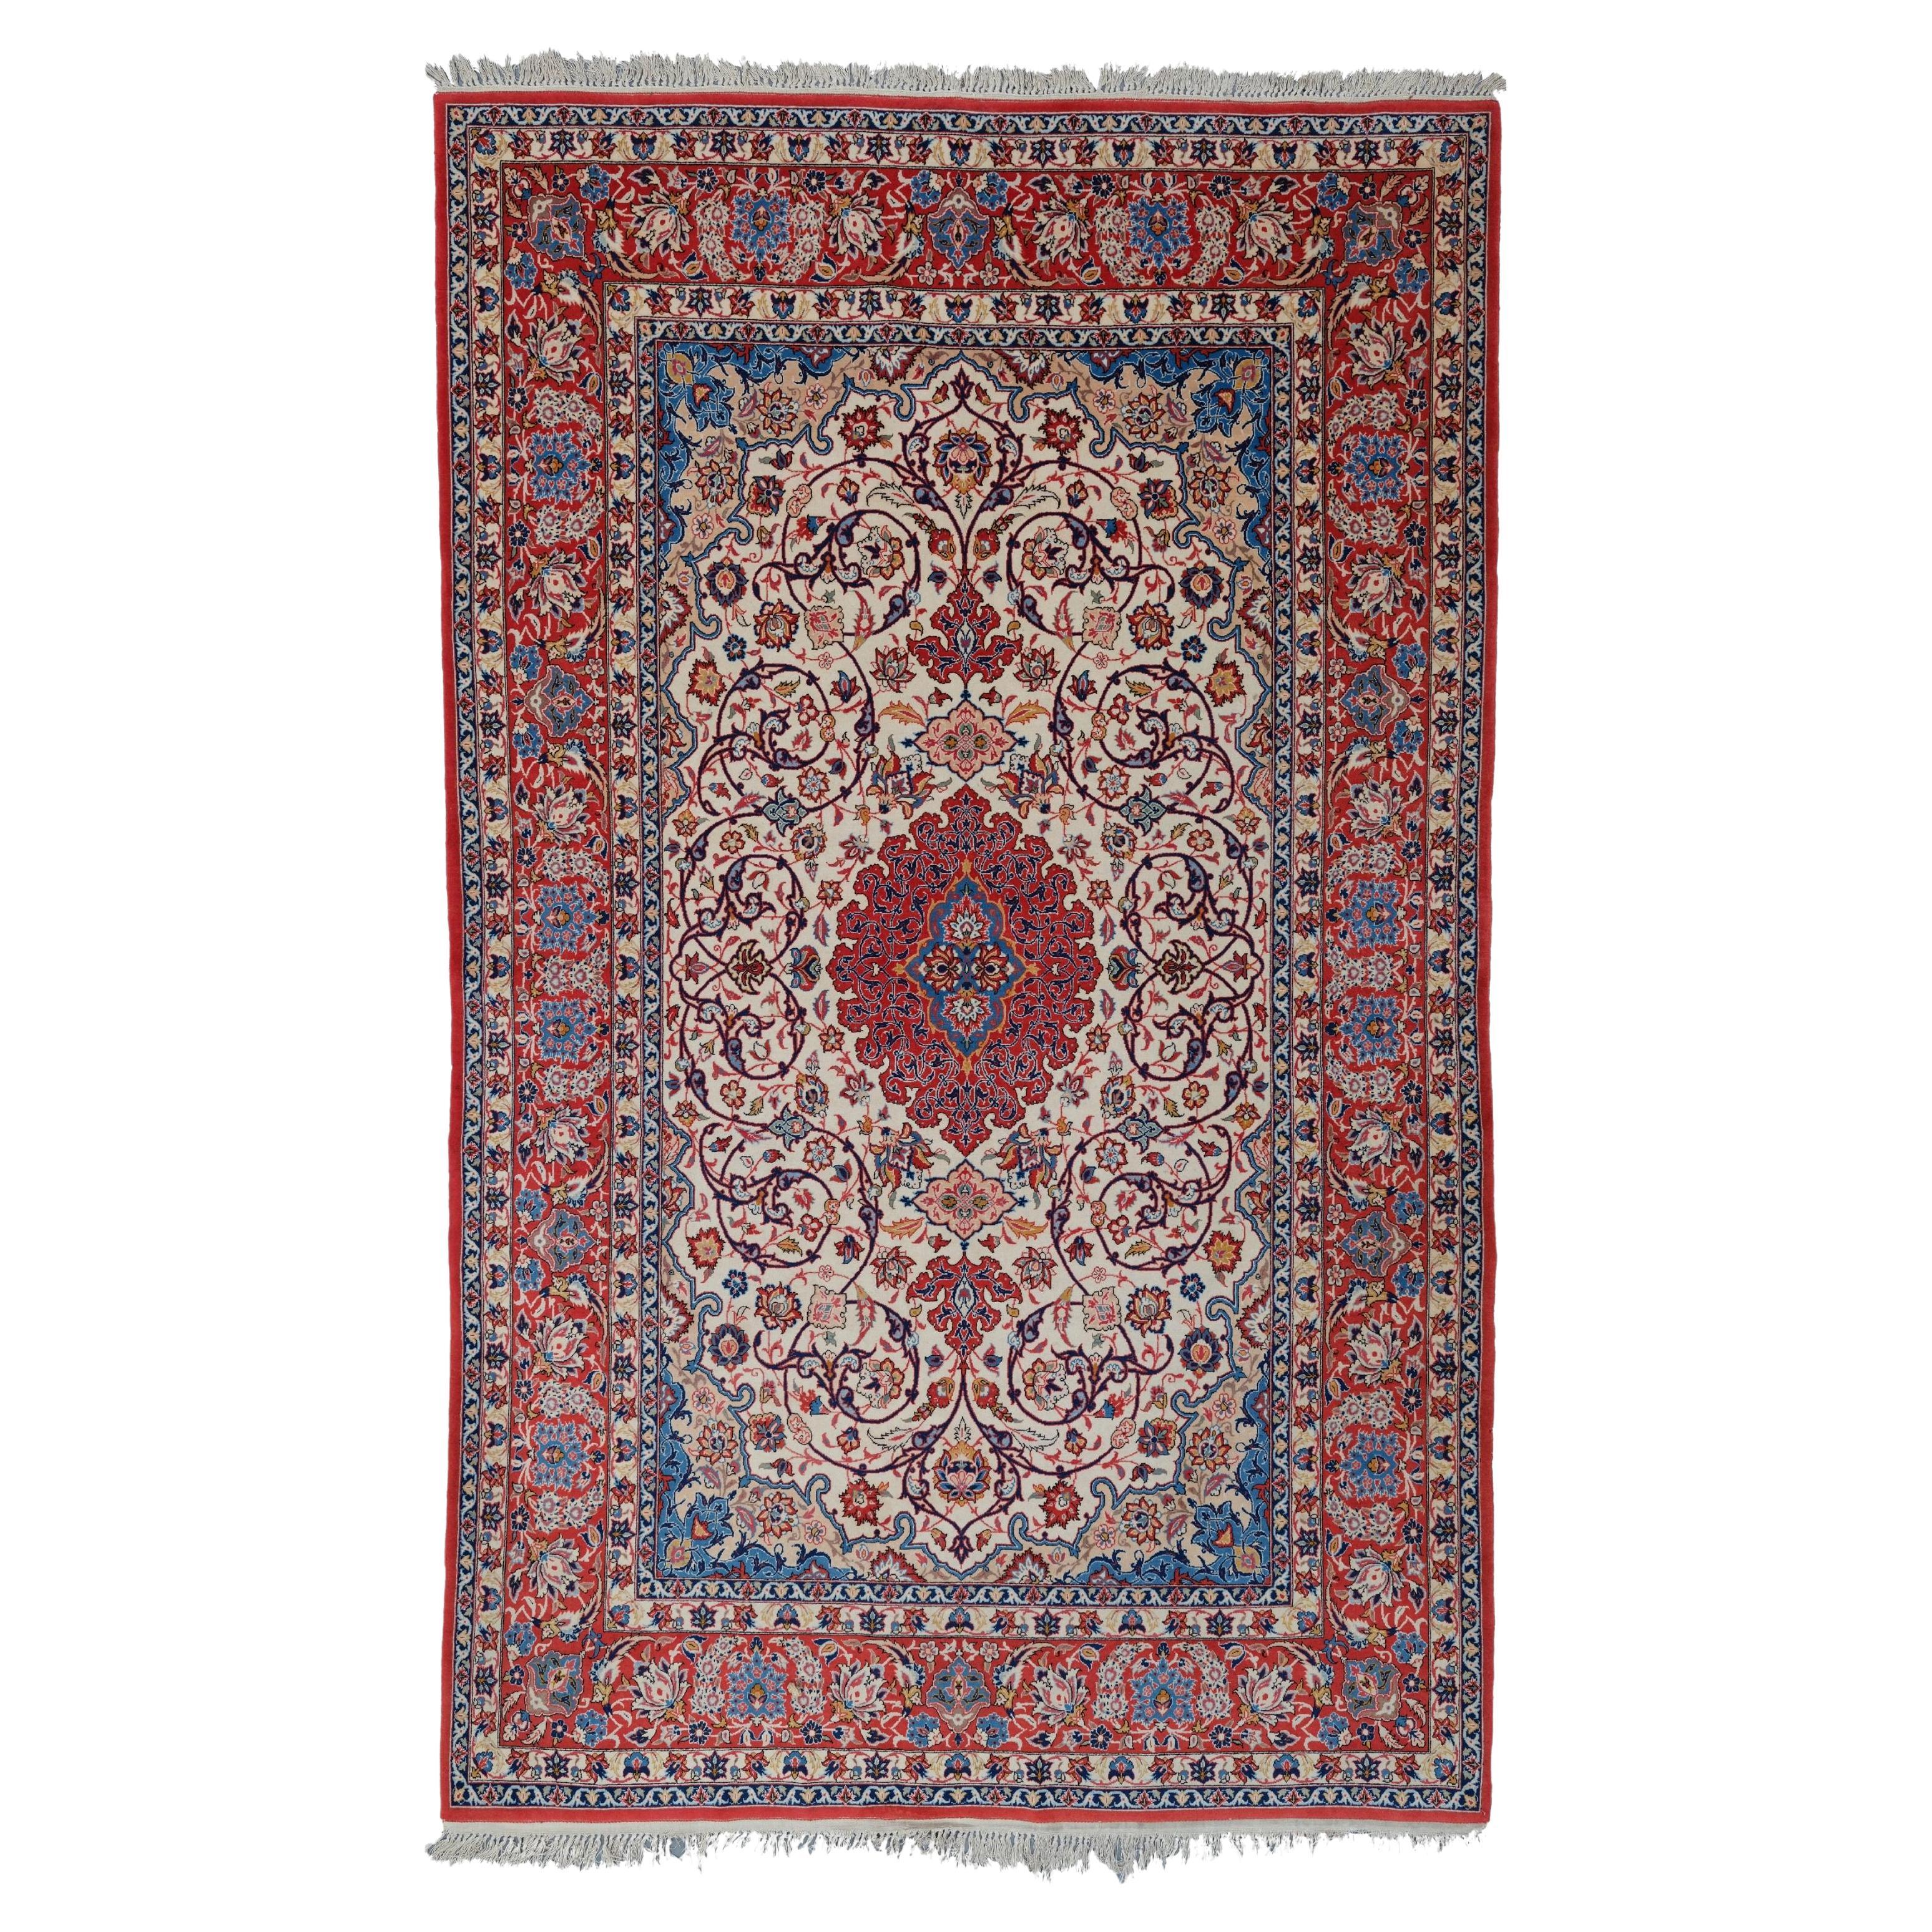 Antique Isfahan Rug - Late of 19th Century Isfahan Rug, Antique Rug, Vintage Rug